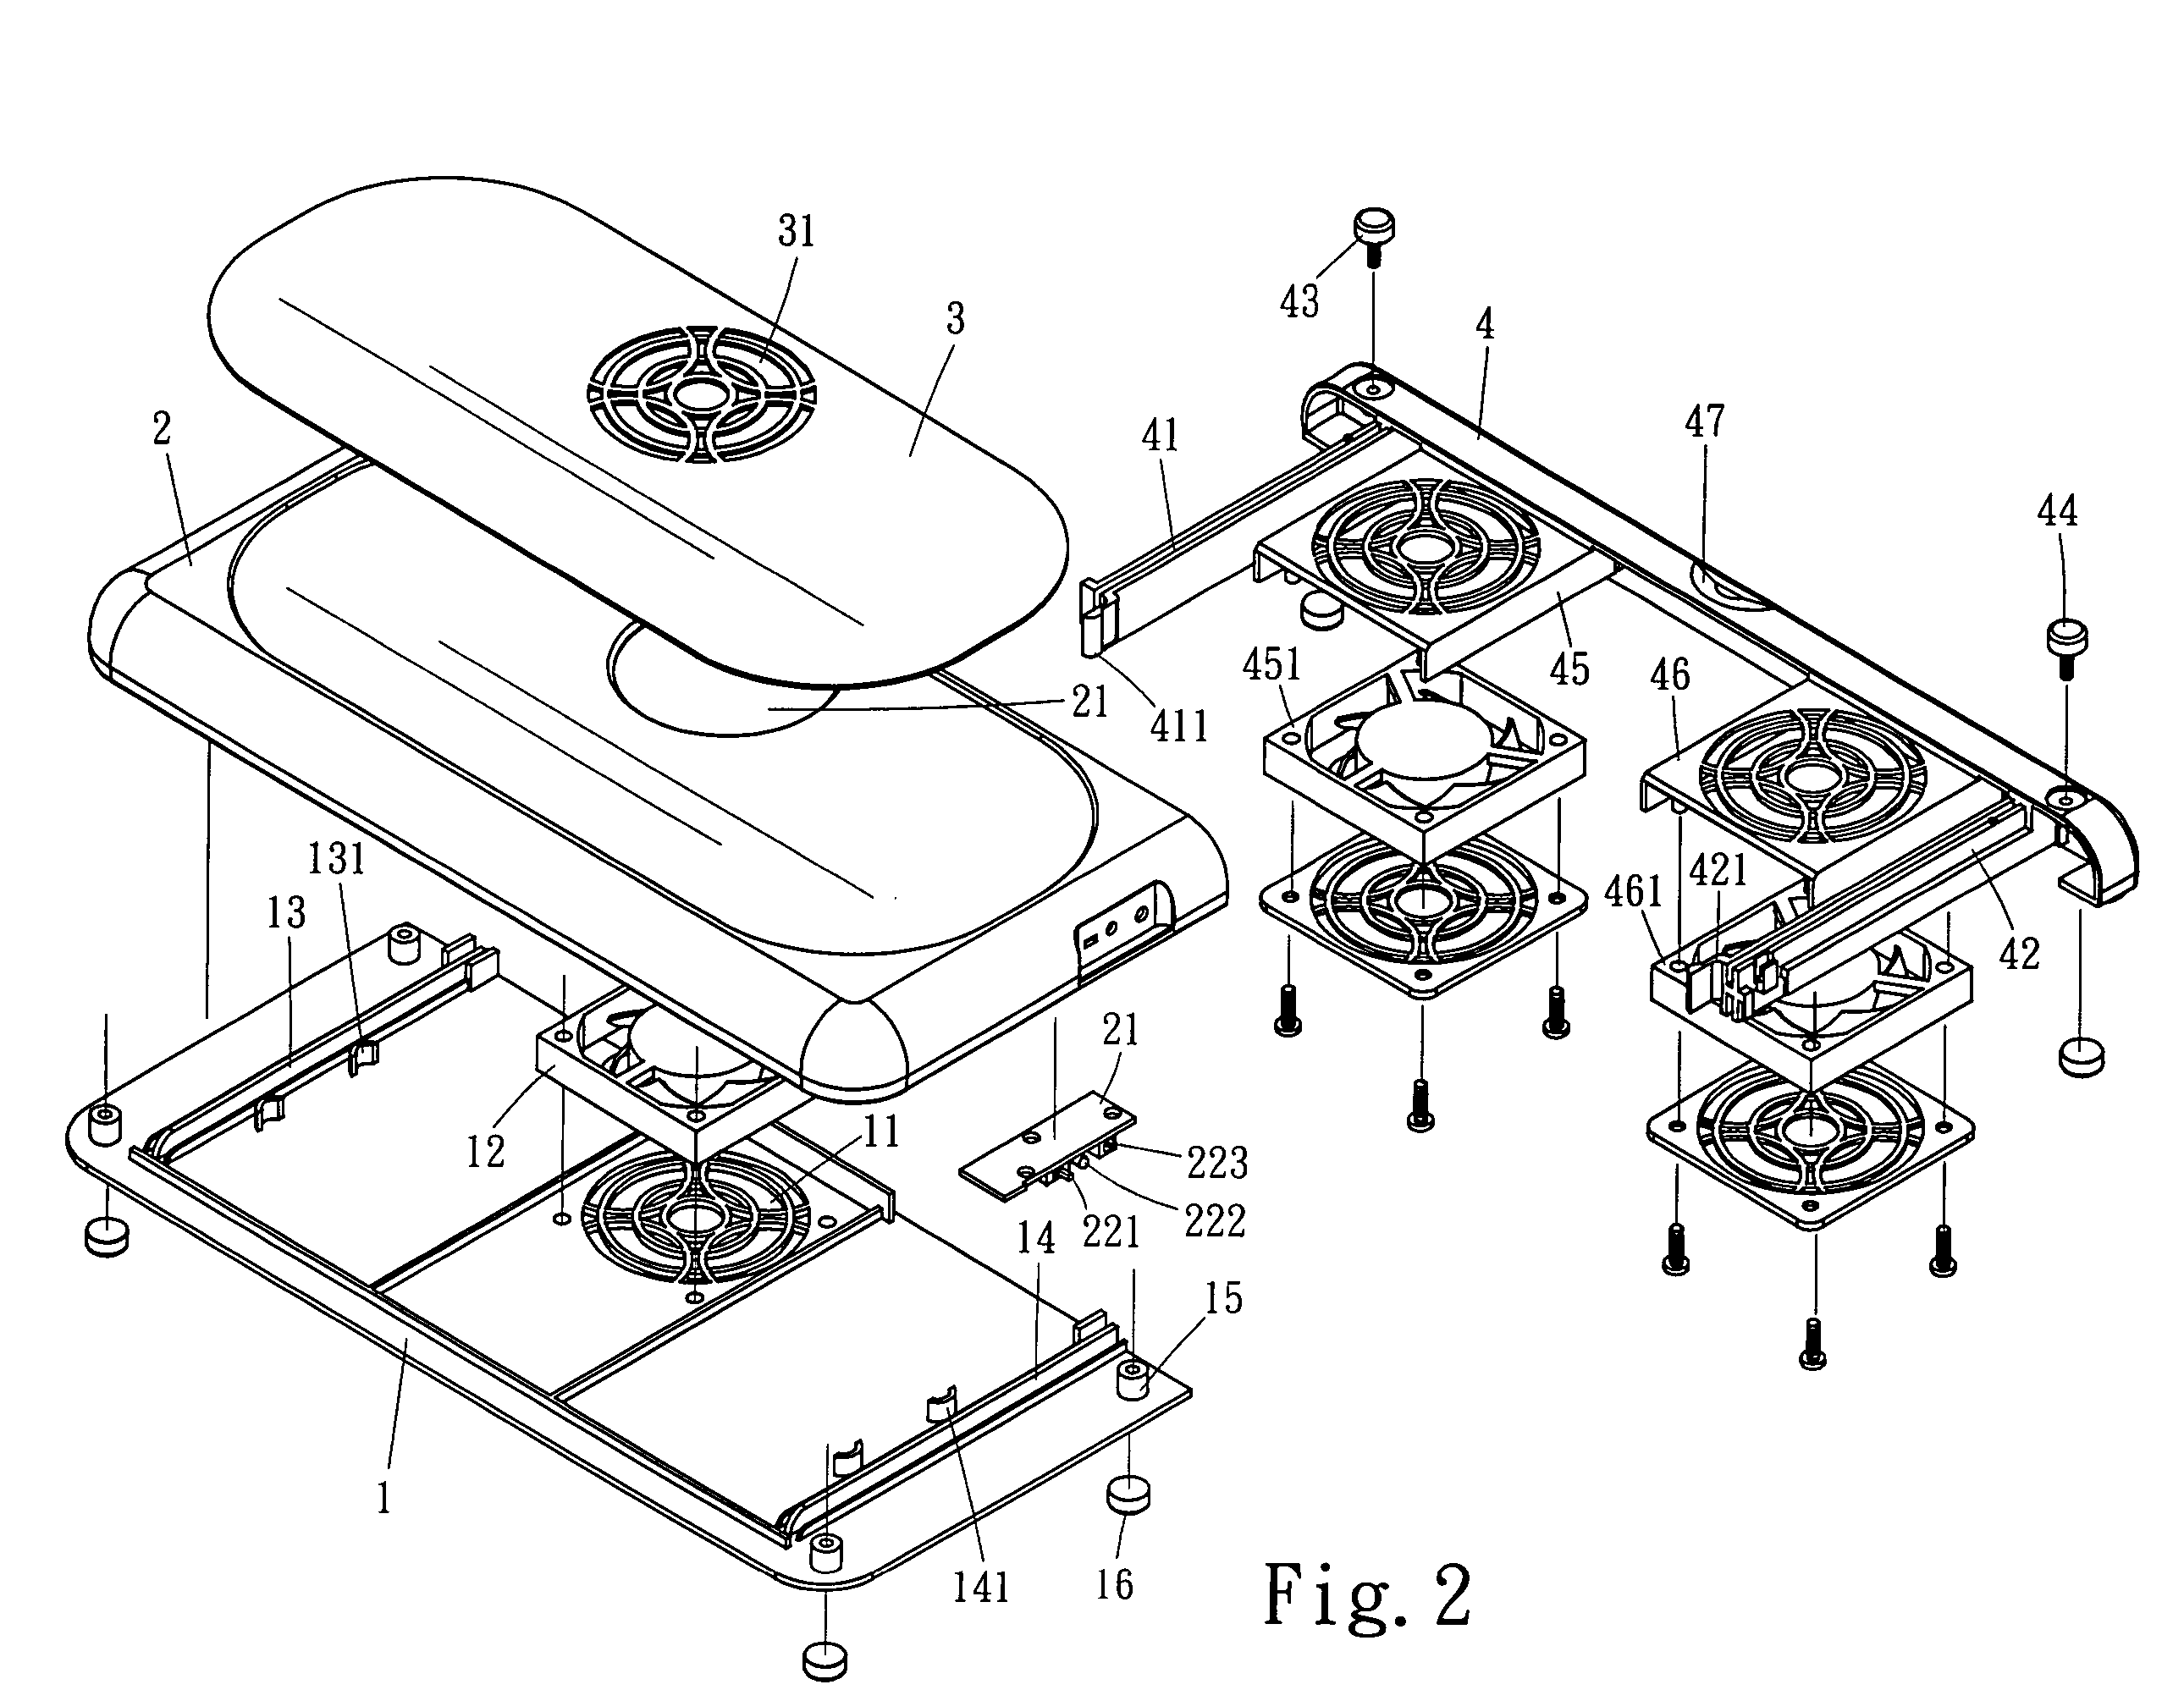 Extendable and receivable heat-dissipating base set for notebooks